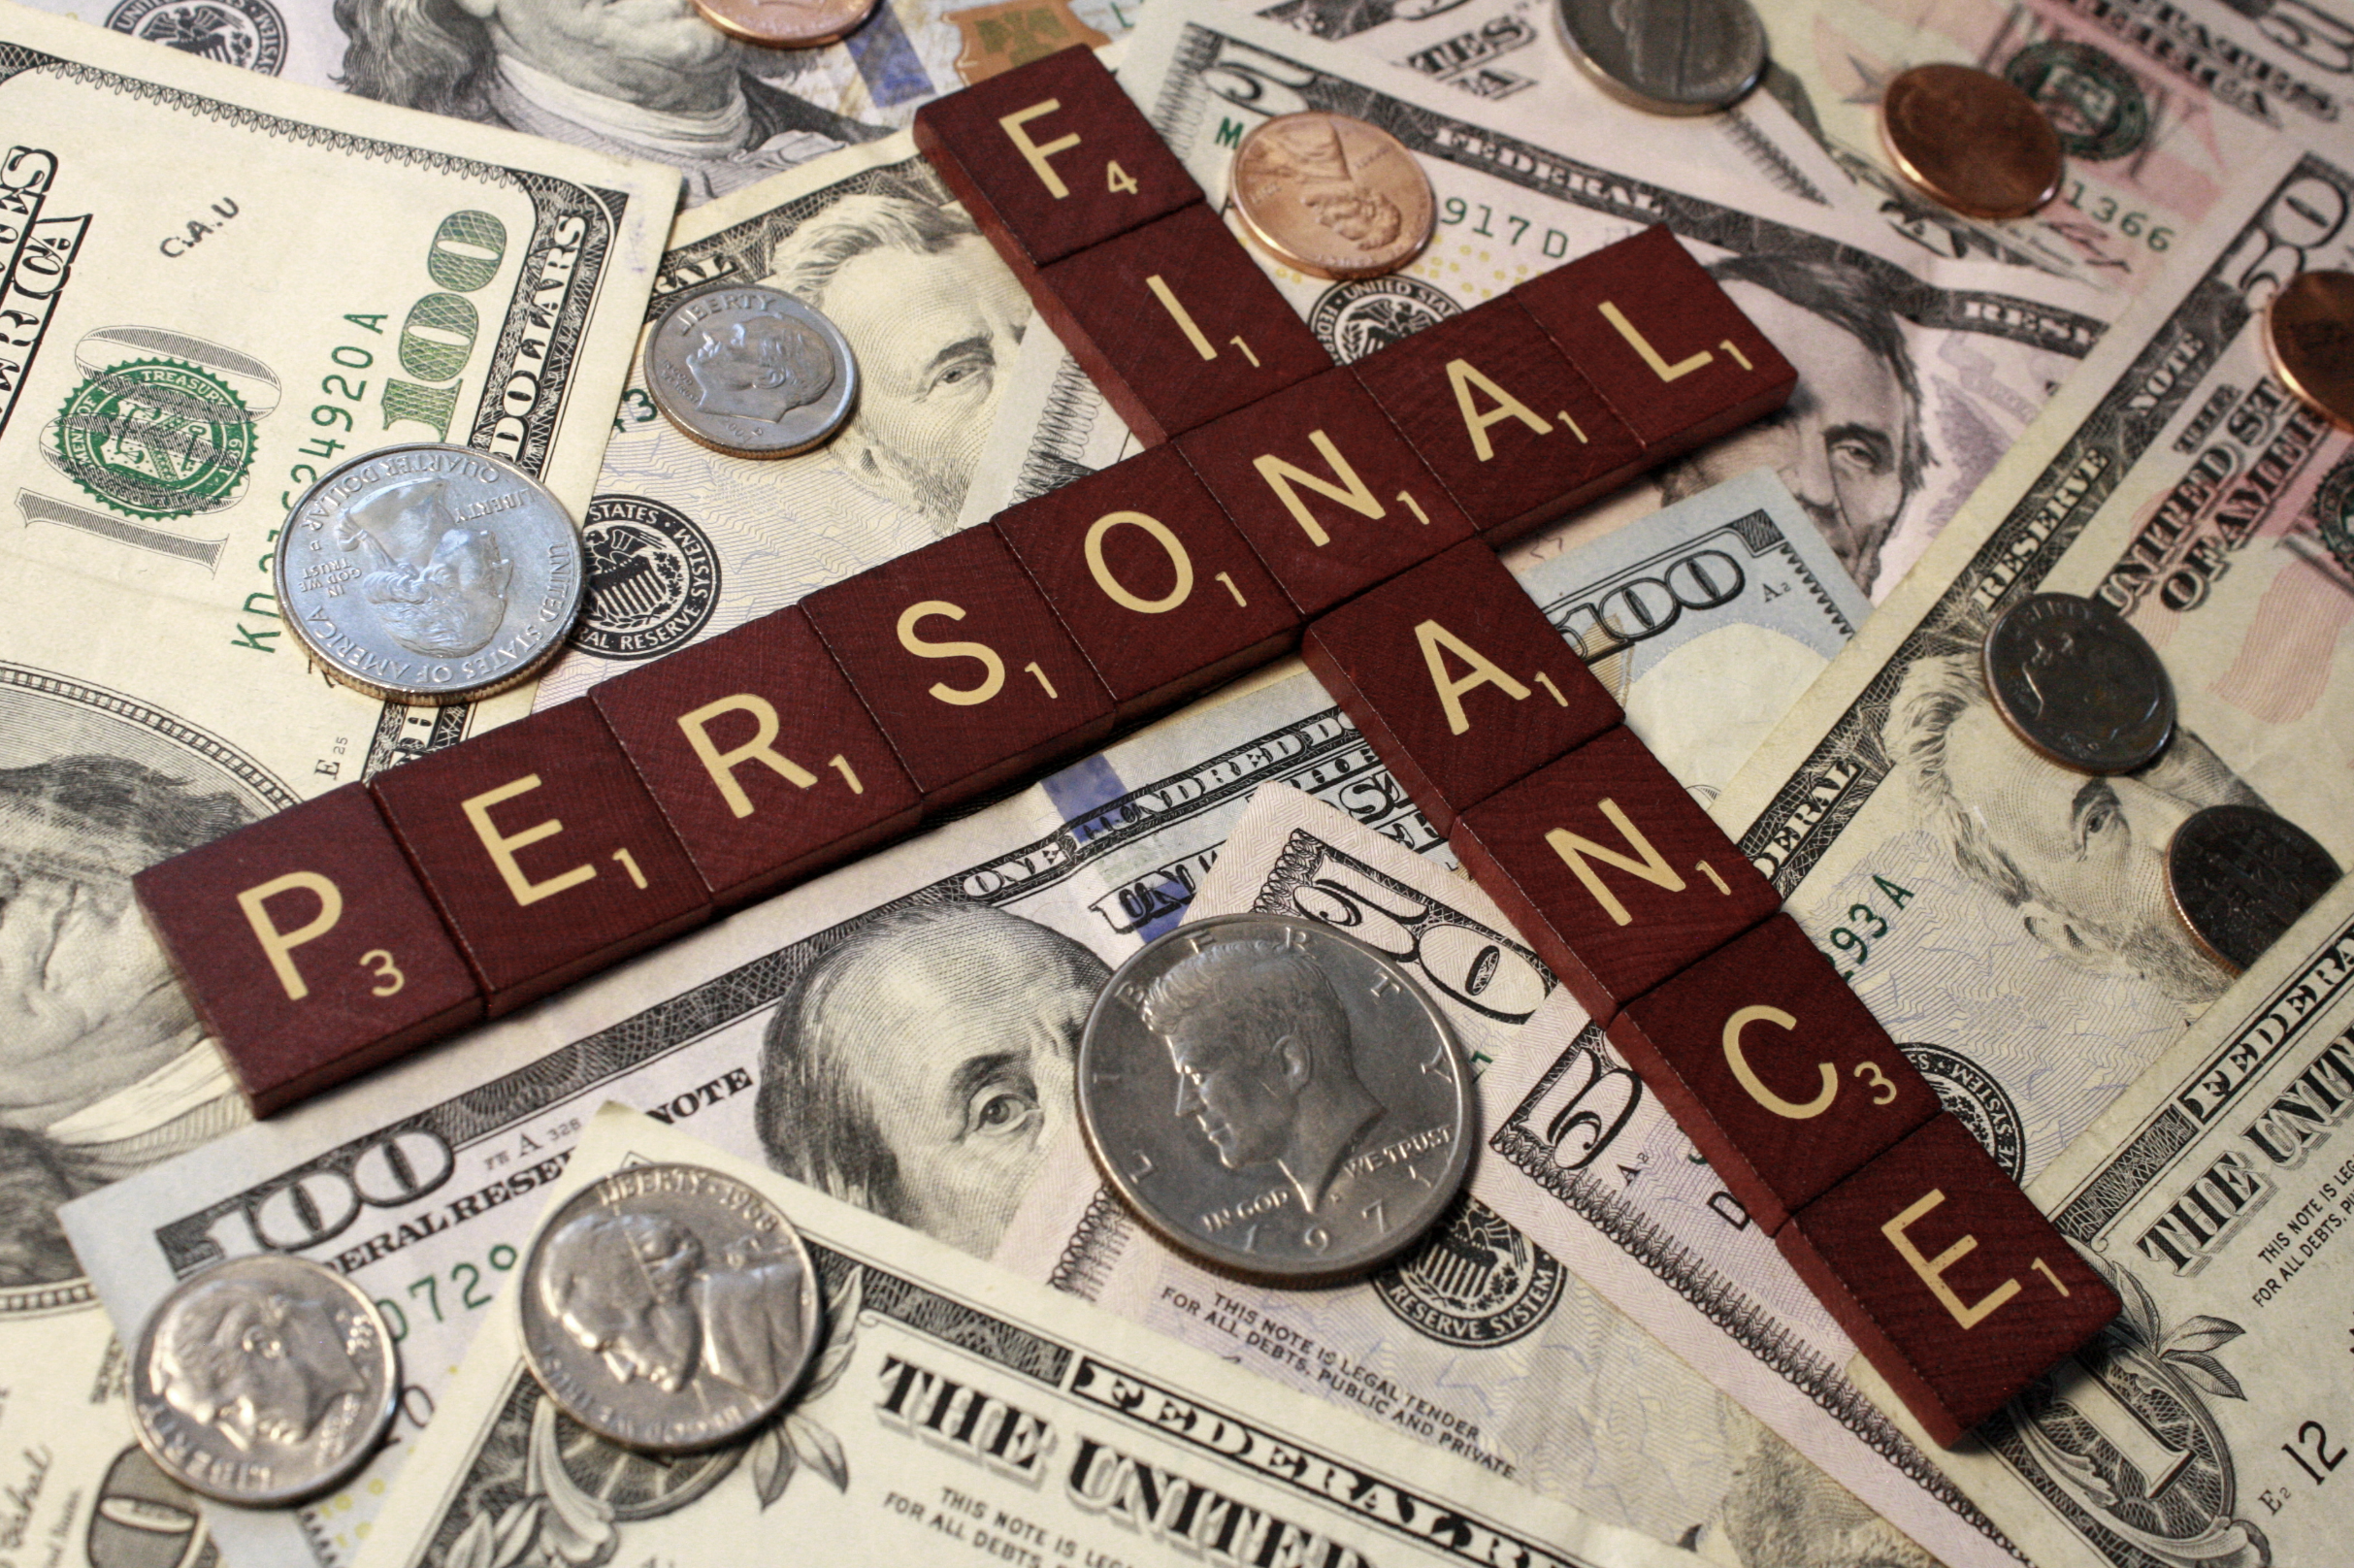 Money-Savvy Bloggers: 5 Things to Consider When Hiring a Personal Finance Blogger